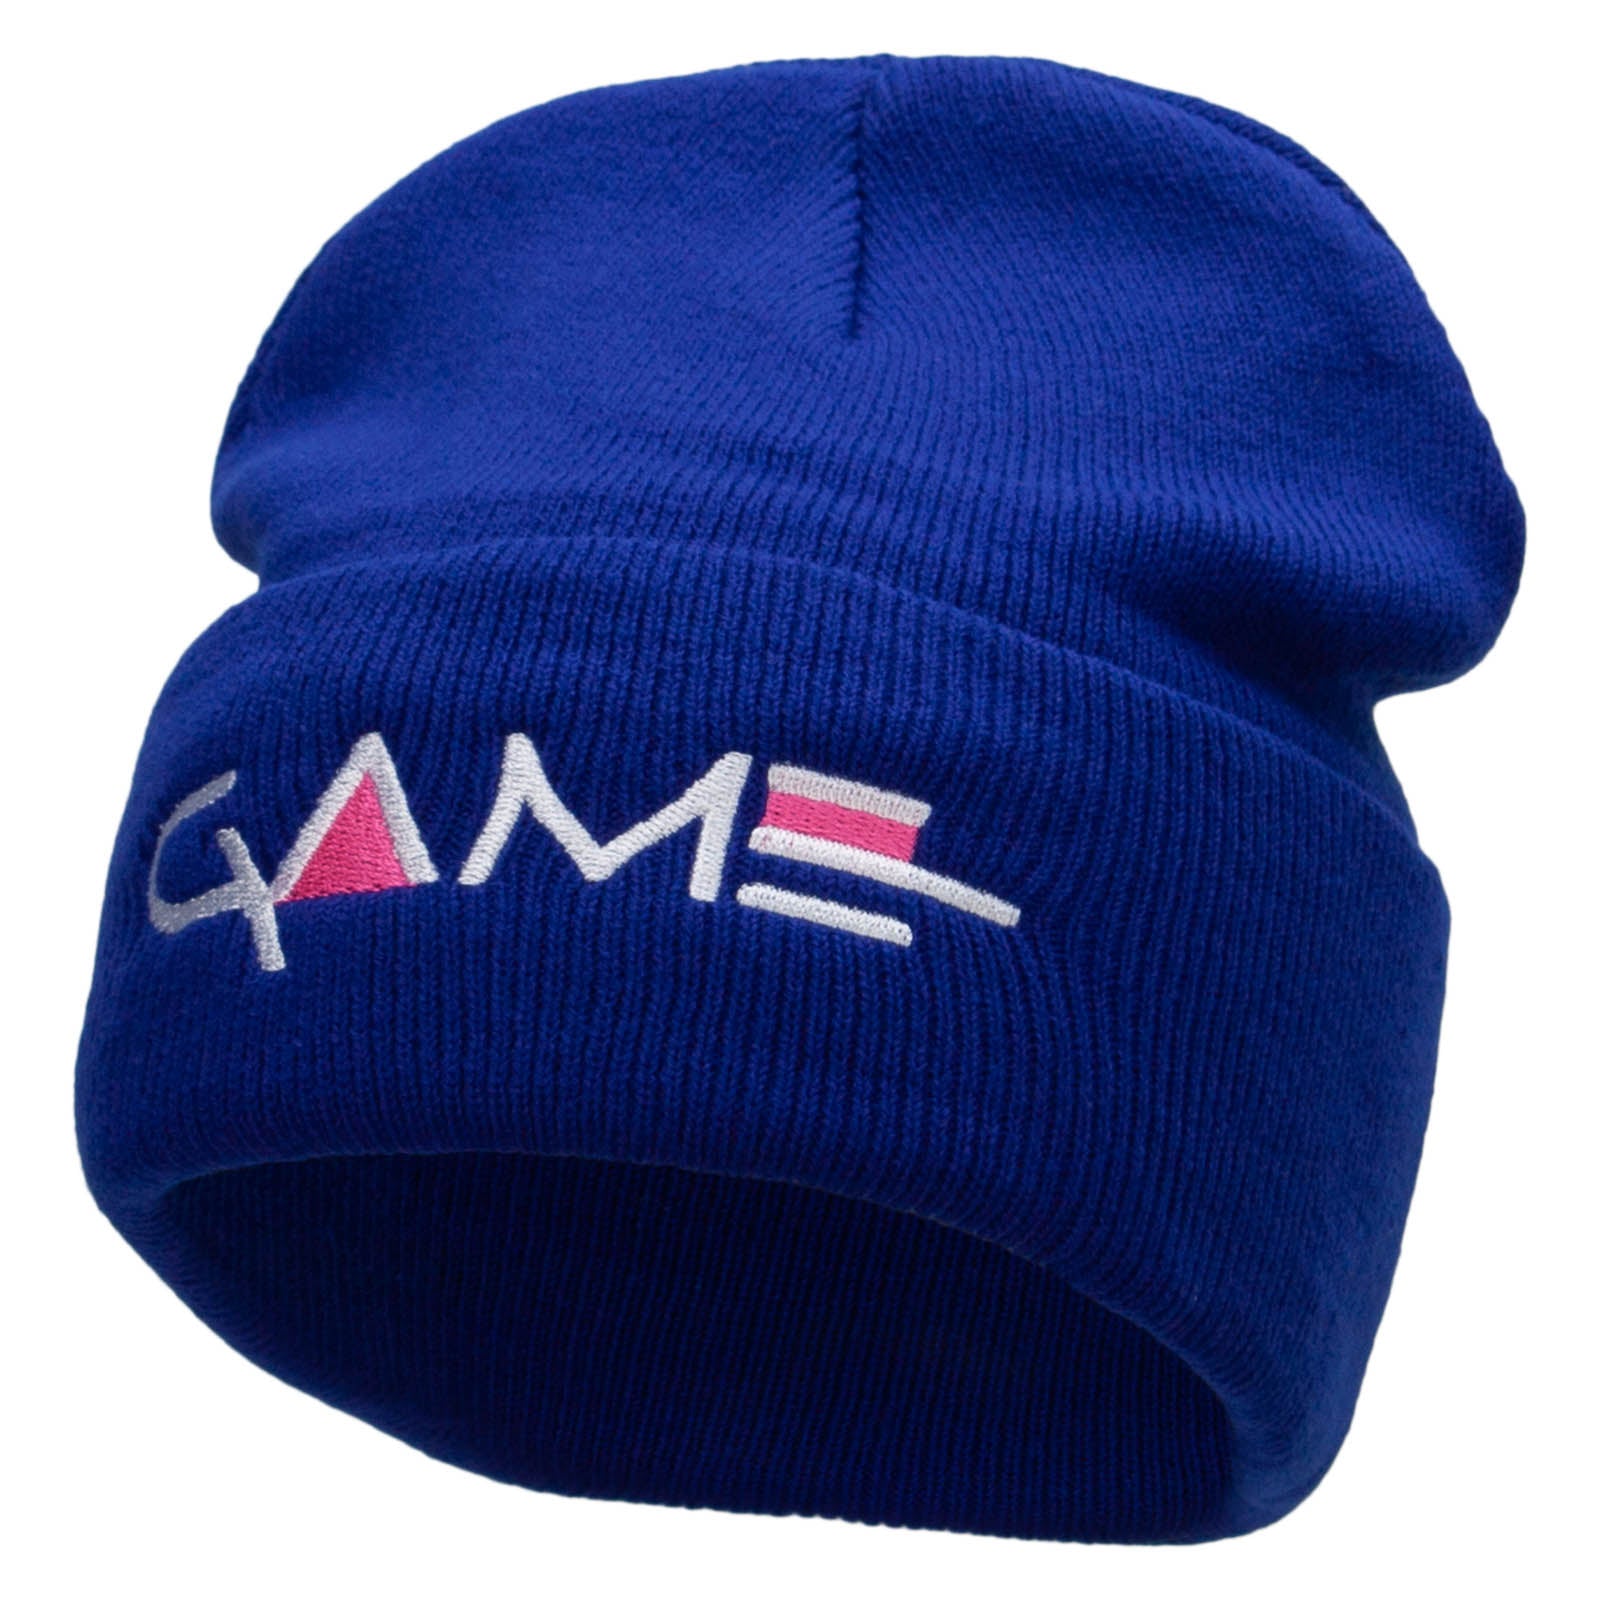 Game Embroidered 12 Inch Long Knitted Beanie - Royal OSFM